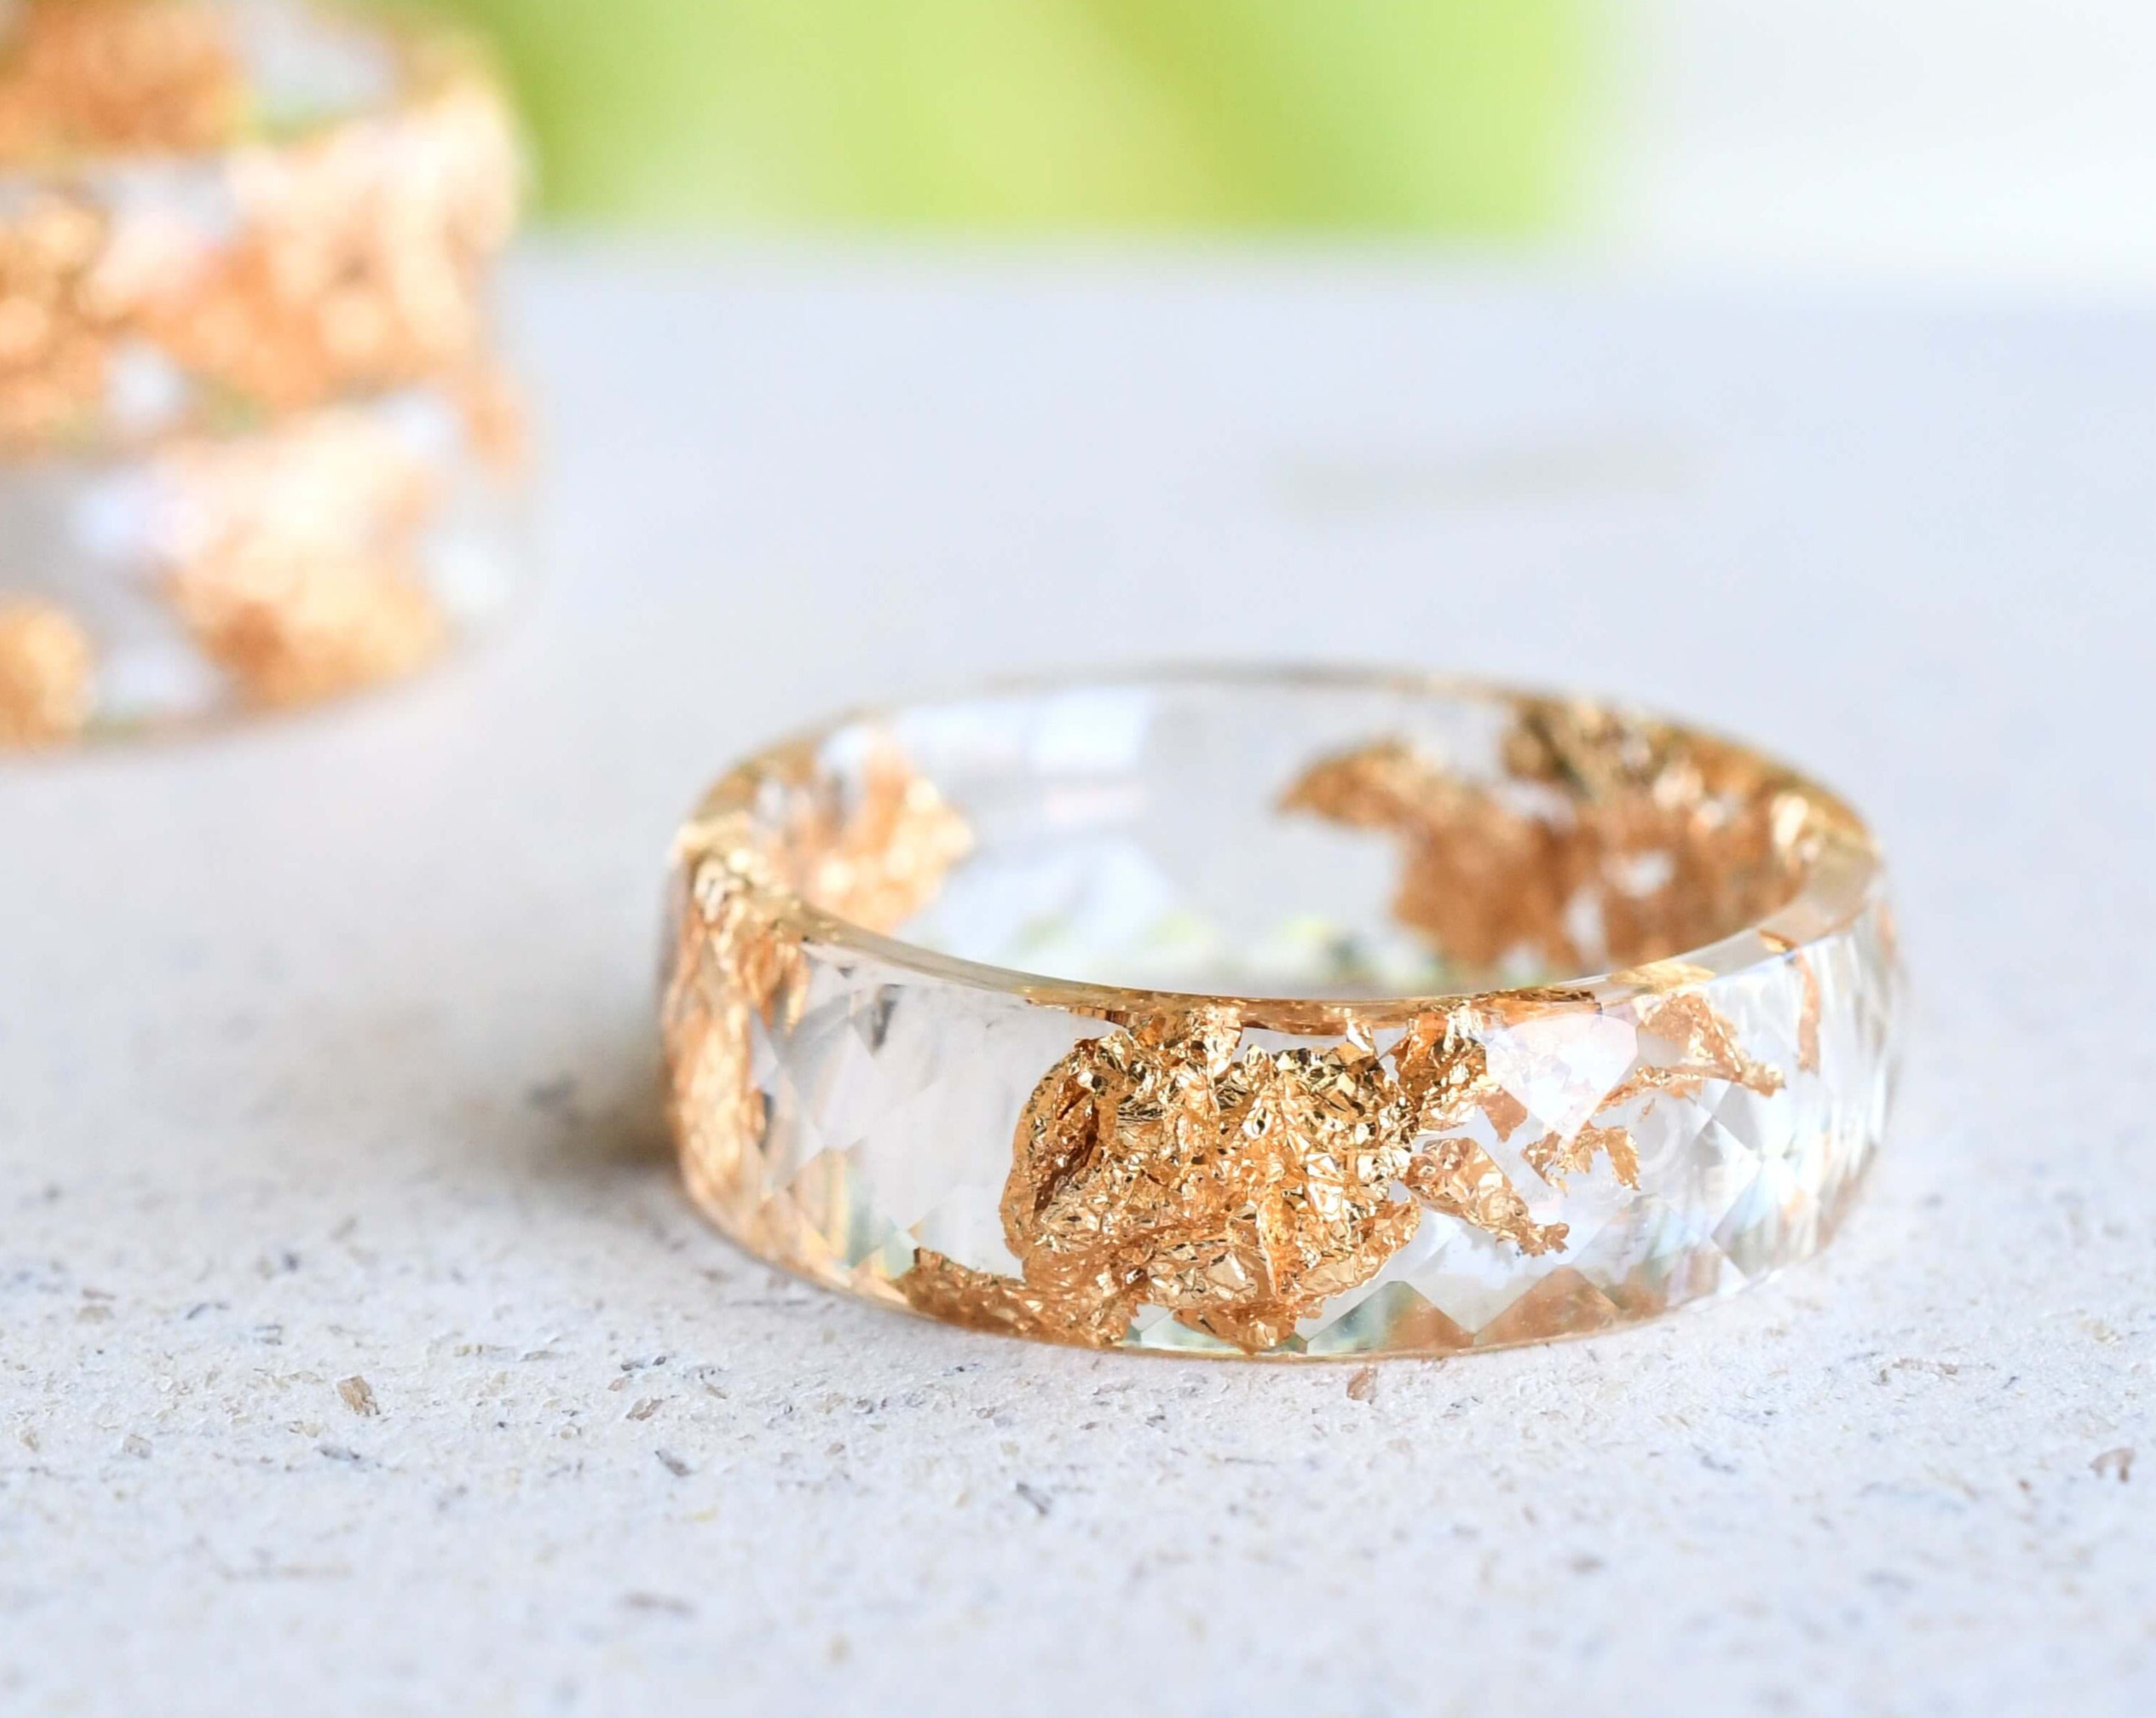 Clear Resin Ring